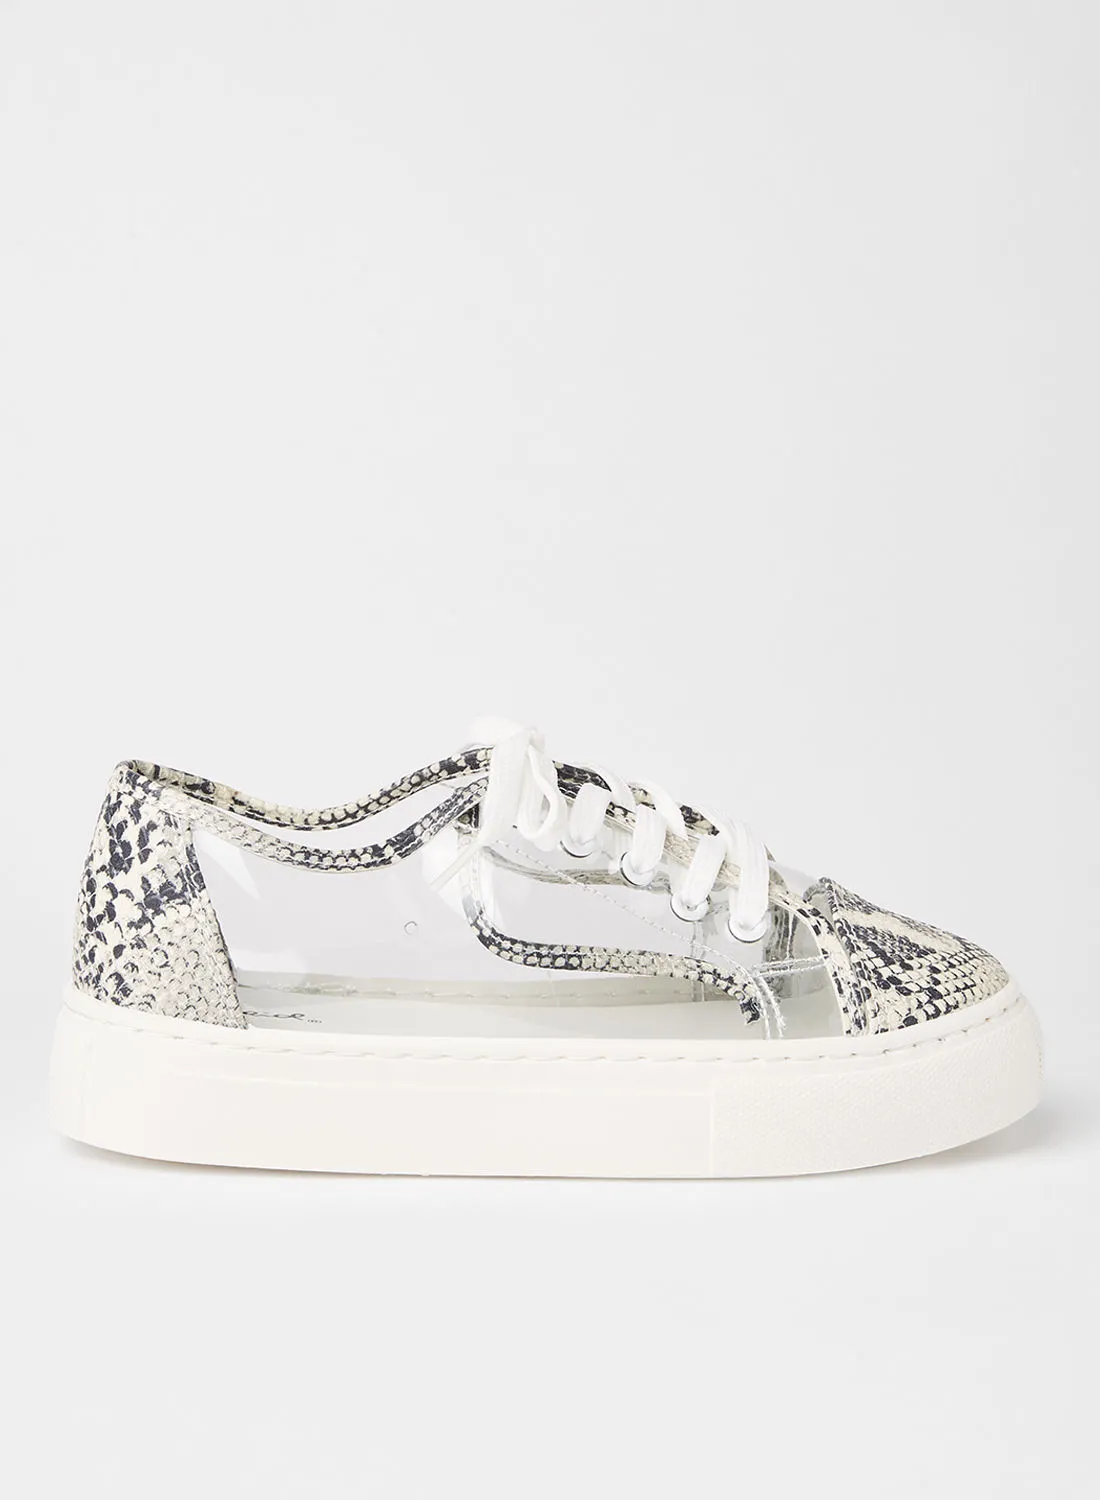 Qupid Royal Textured Sneakers White Grey